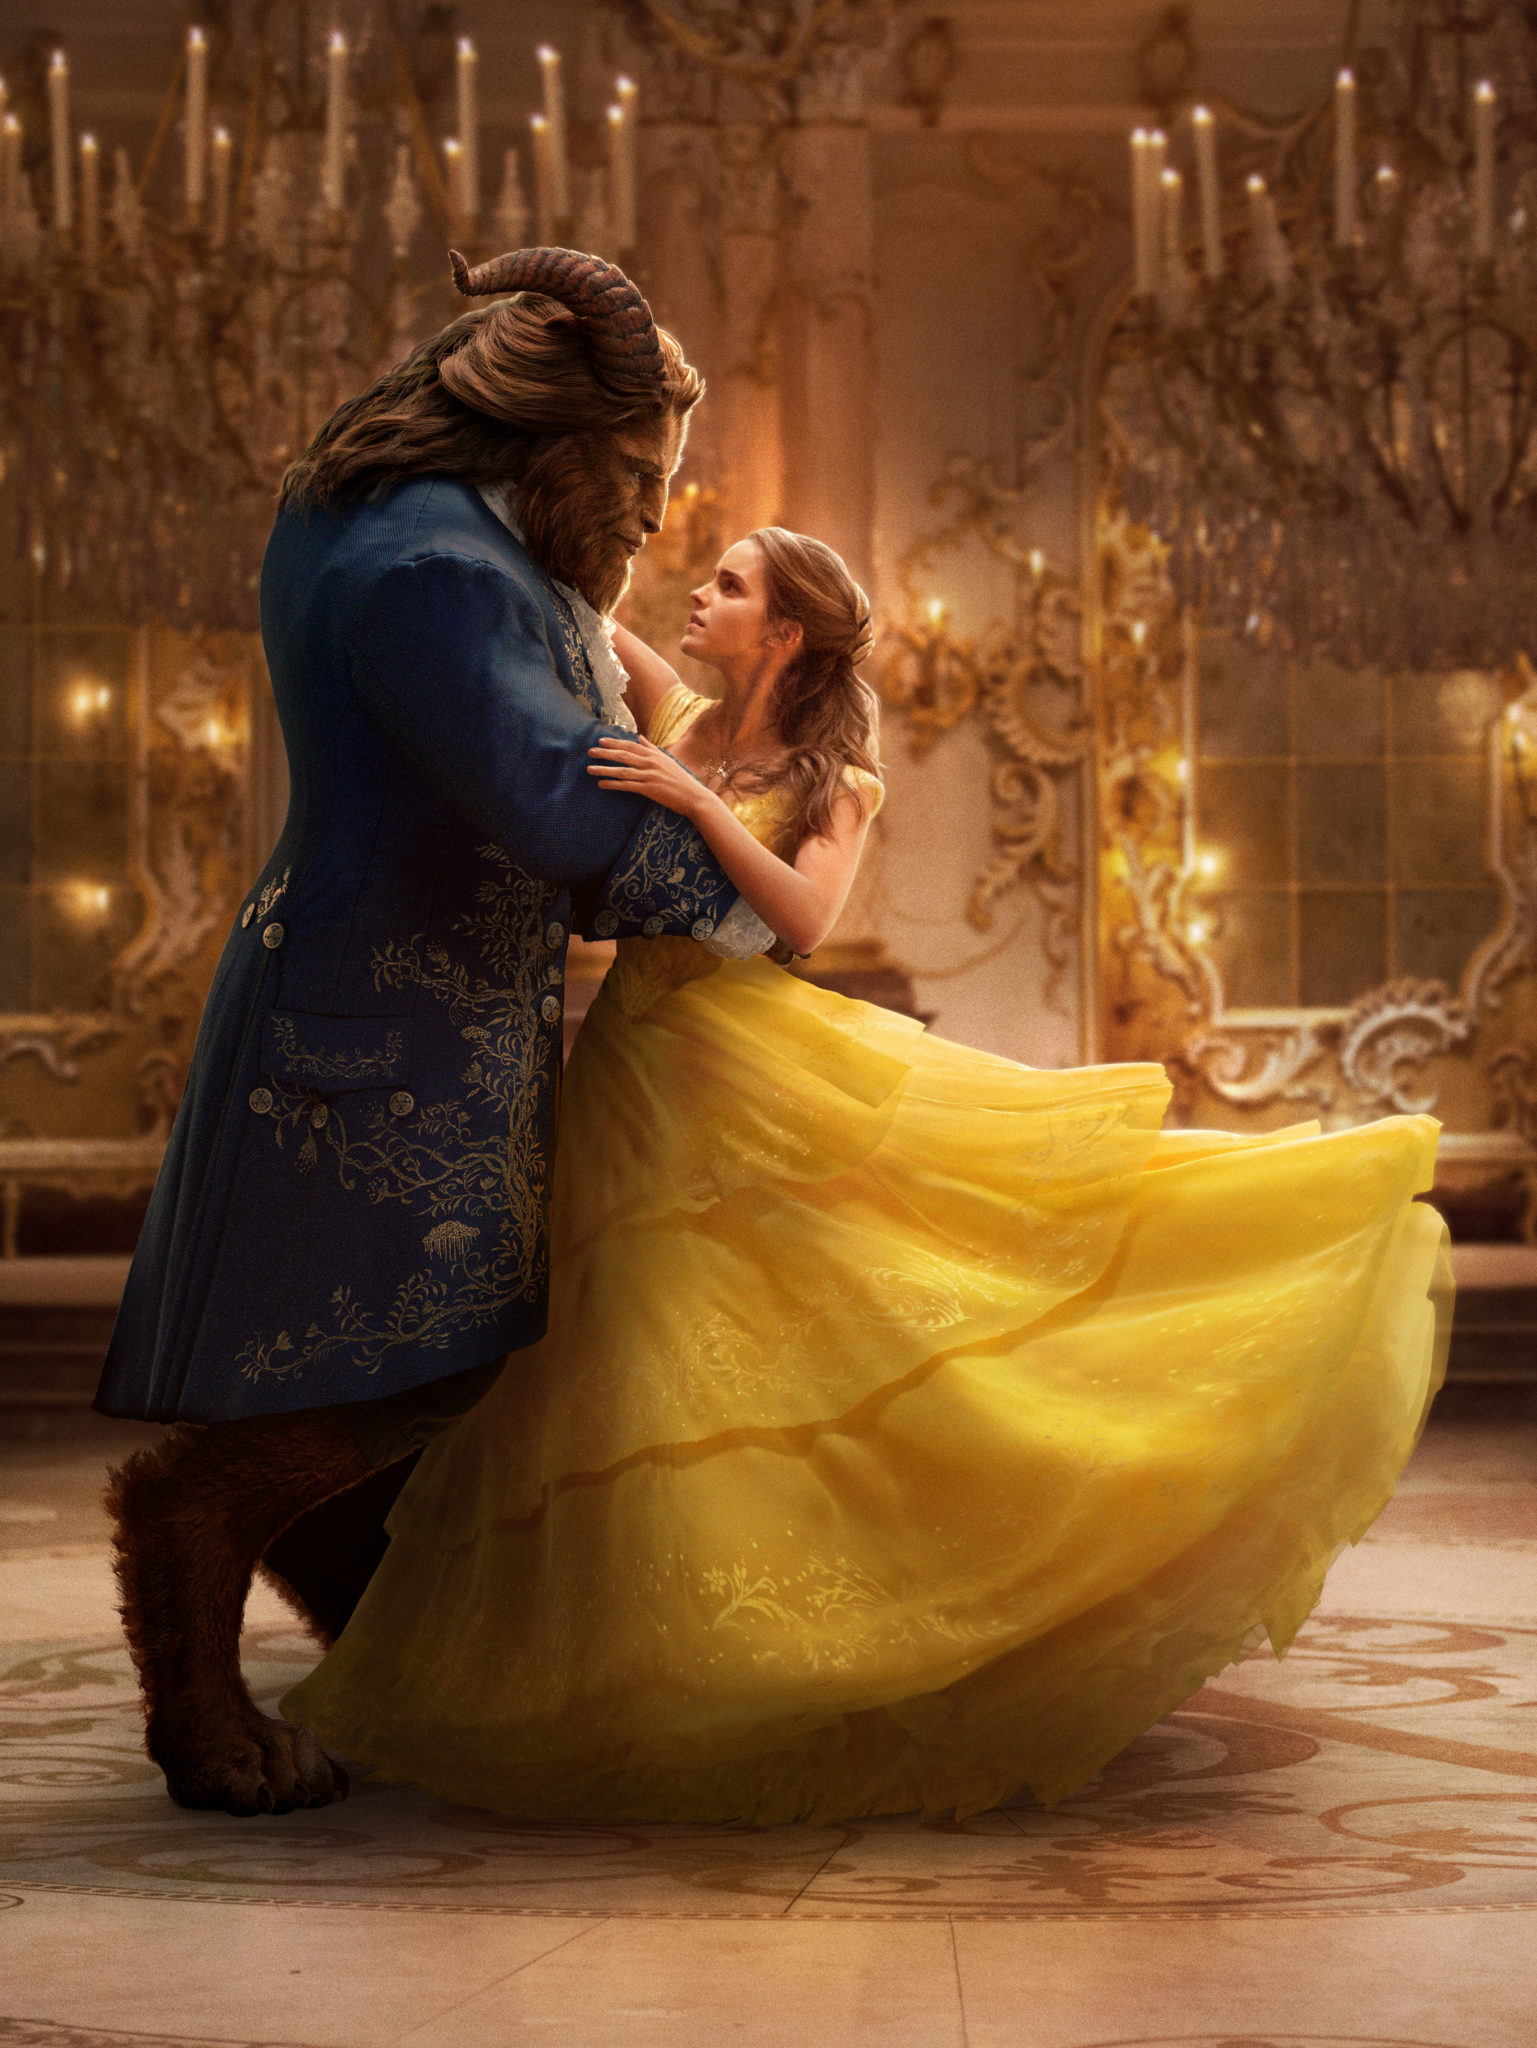 Brand New Images Of The Upcoming Film ‘Beauty And The Beast’